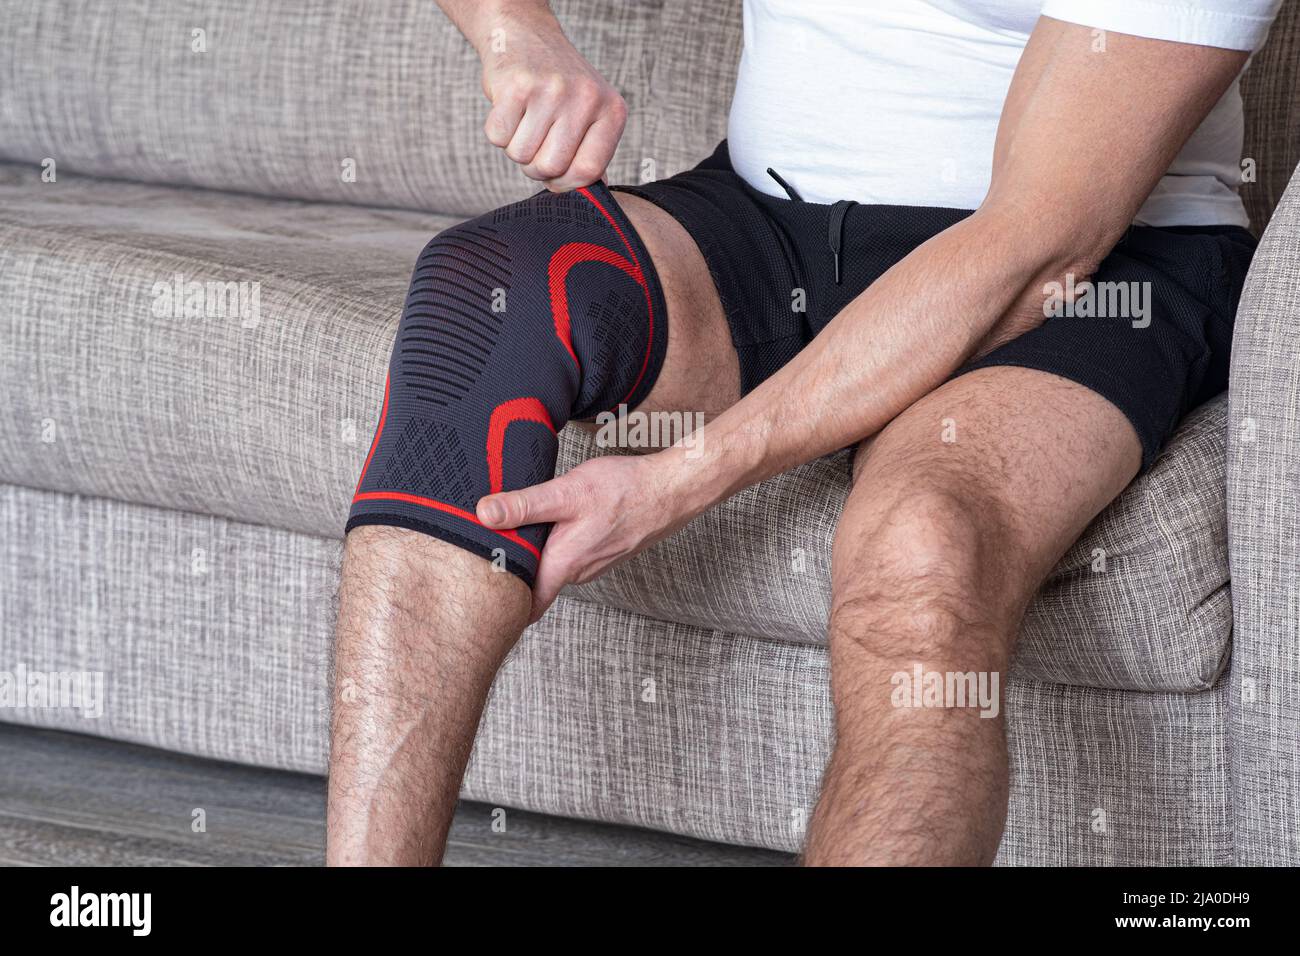 The guy puts a compression bandage on the injured knee. Preparing for sports activities, the sore spot is highlighted in red Stock Photo